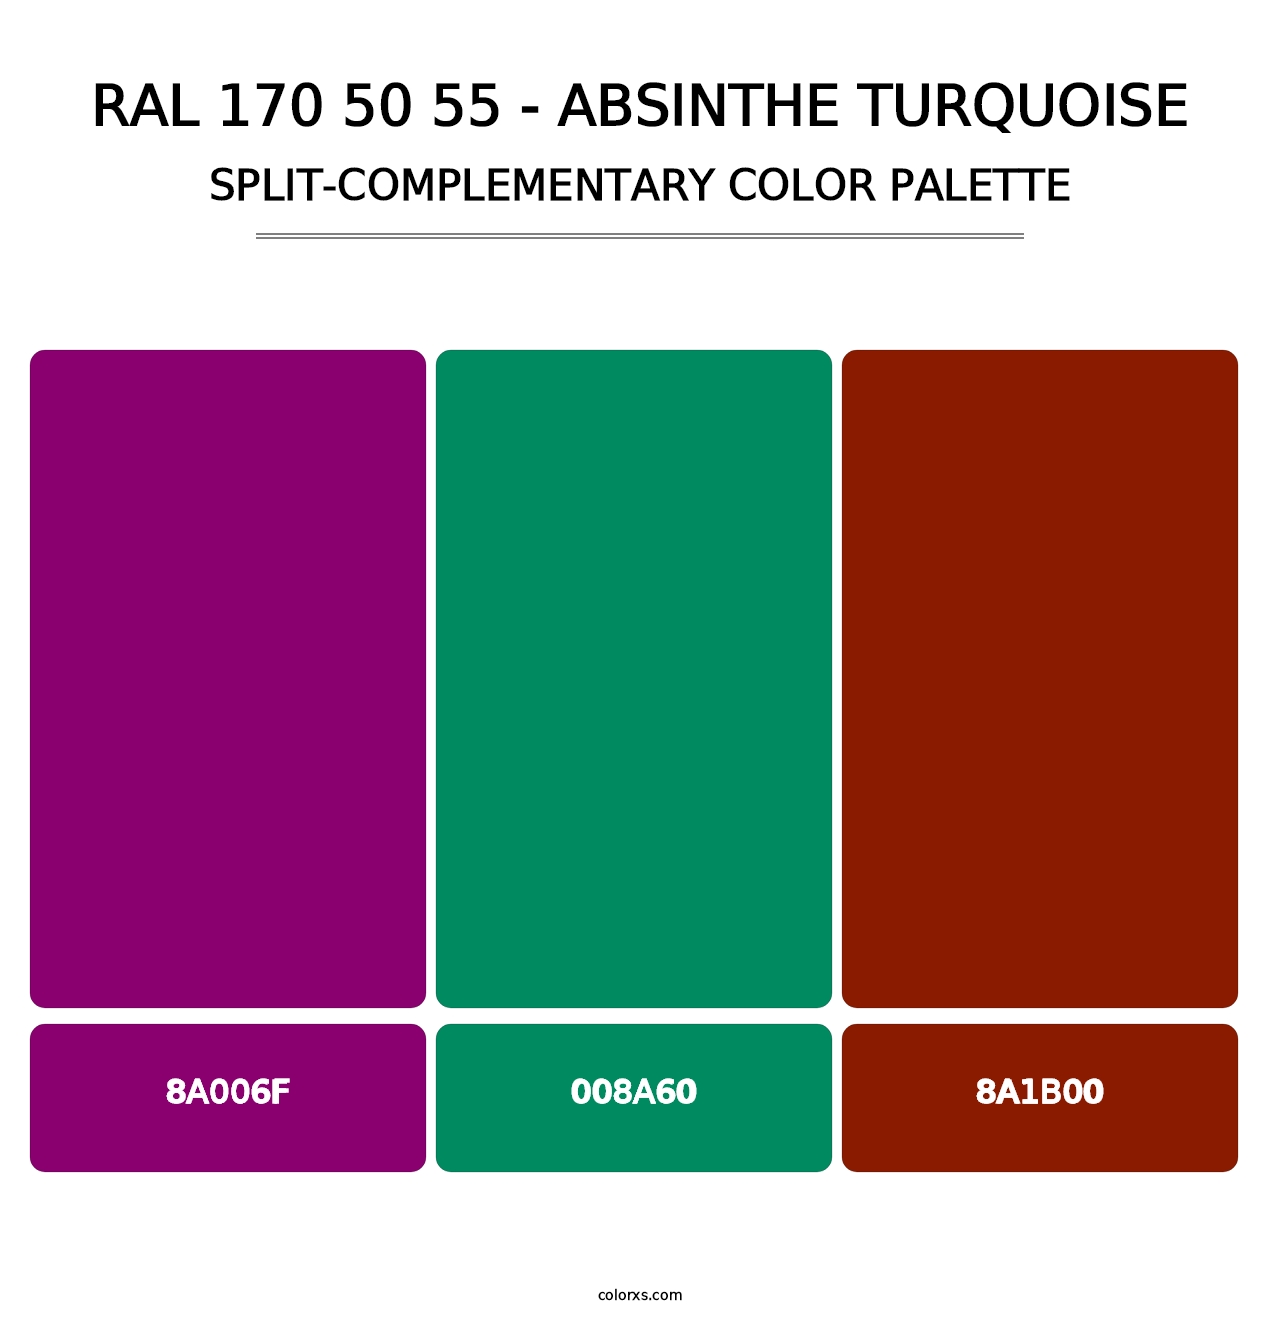 RAL 170 50 55 - Absinthe Turquoise - Split-Complementary Color Palette